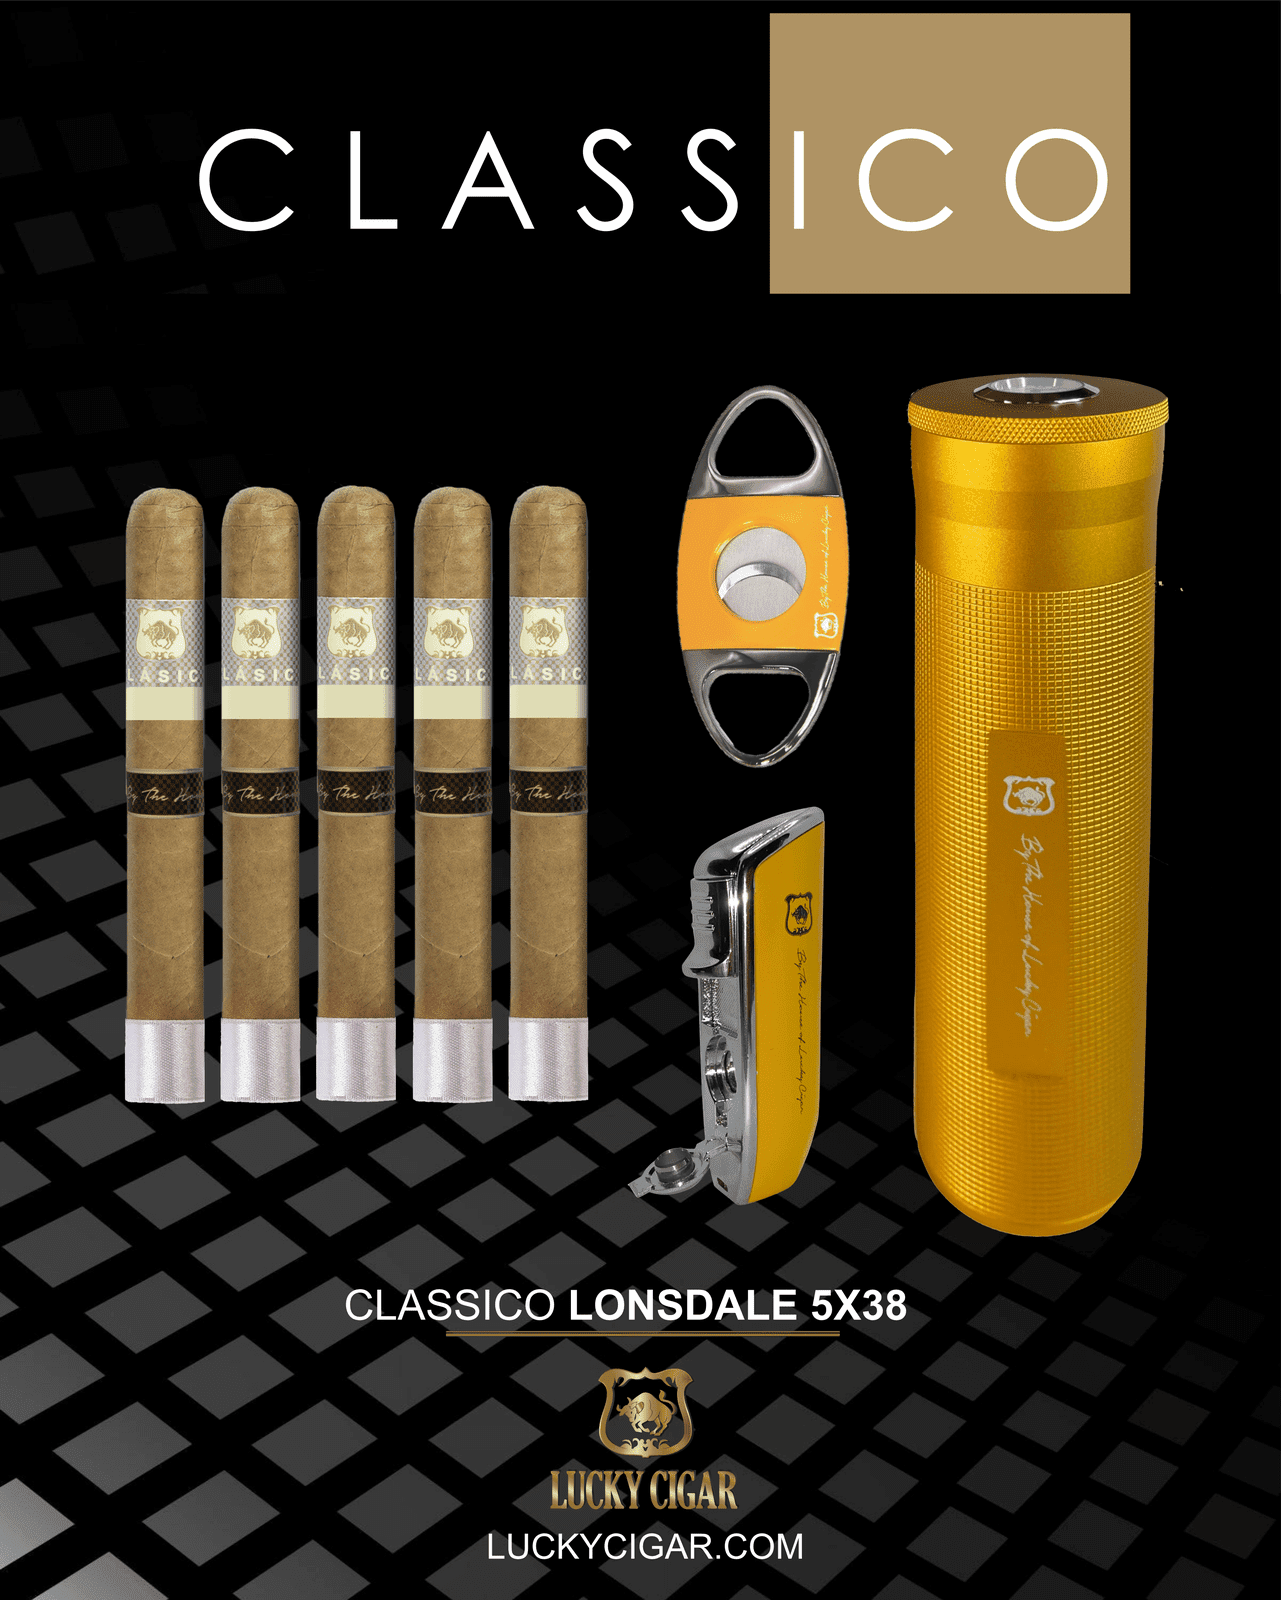 Classic Cigars - Classico by Lucky Cigar: Set of 5 Cigars, 5 Lonsdale with Torch, Cutter, Humidor